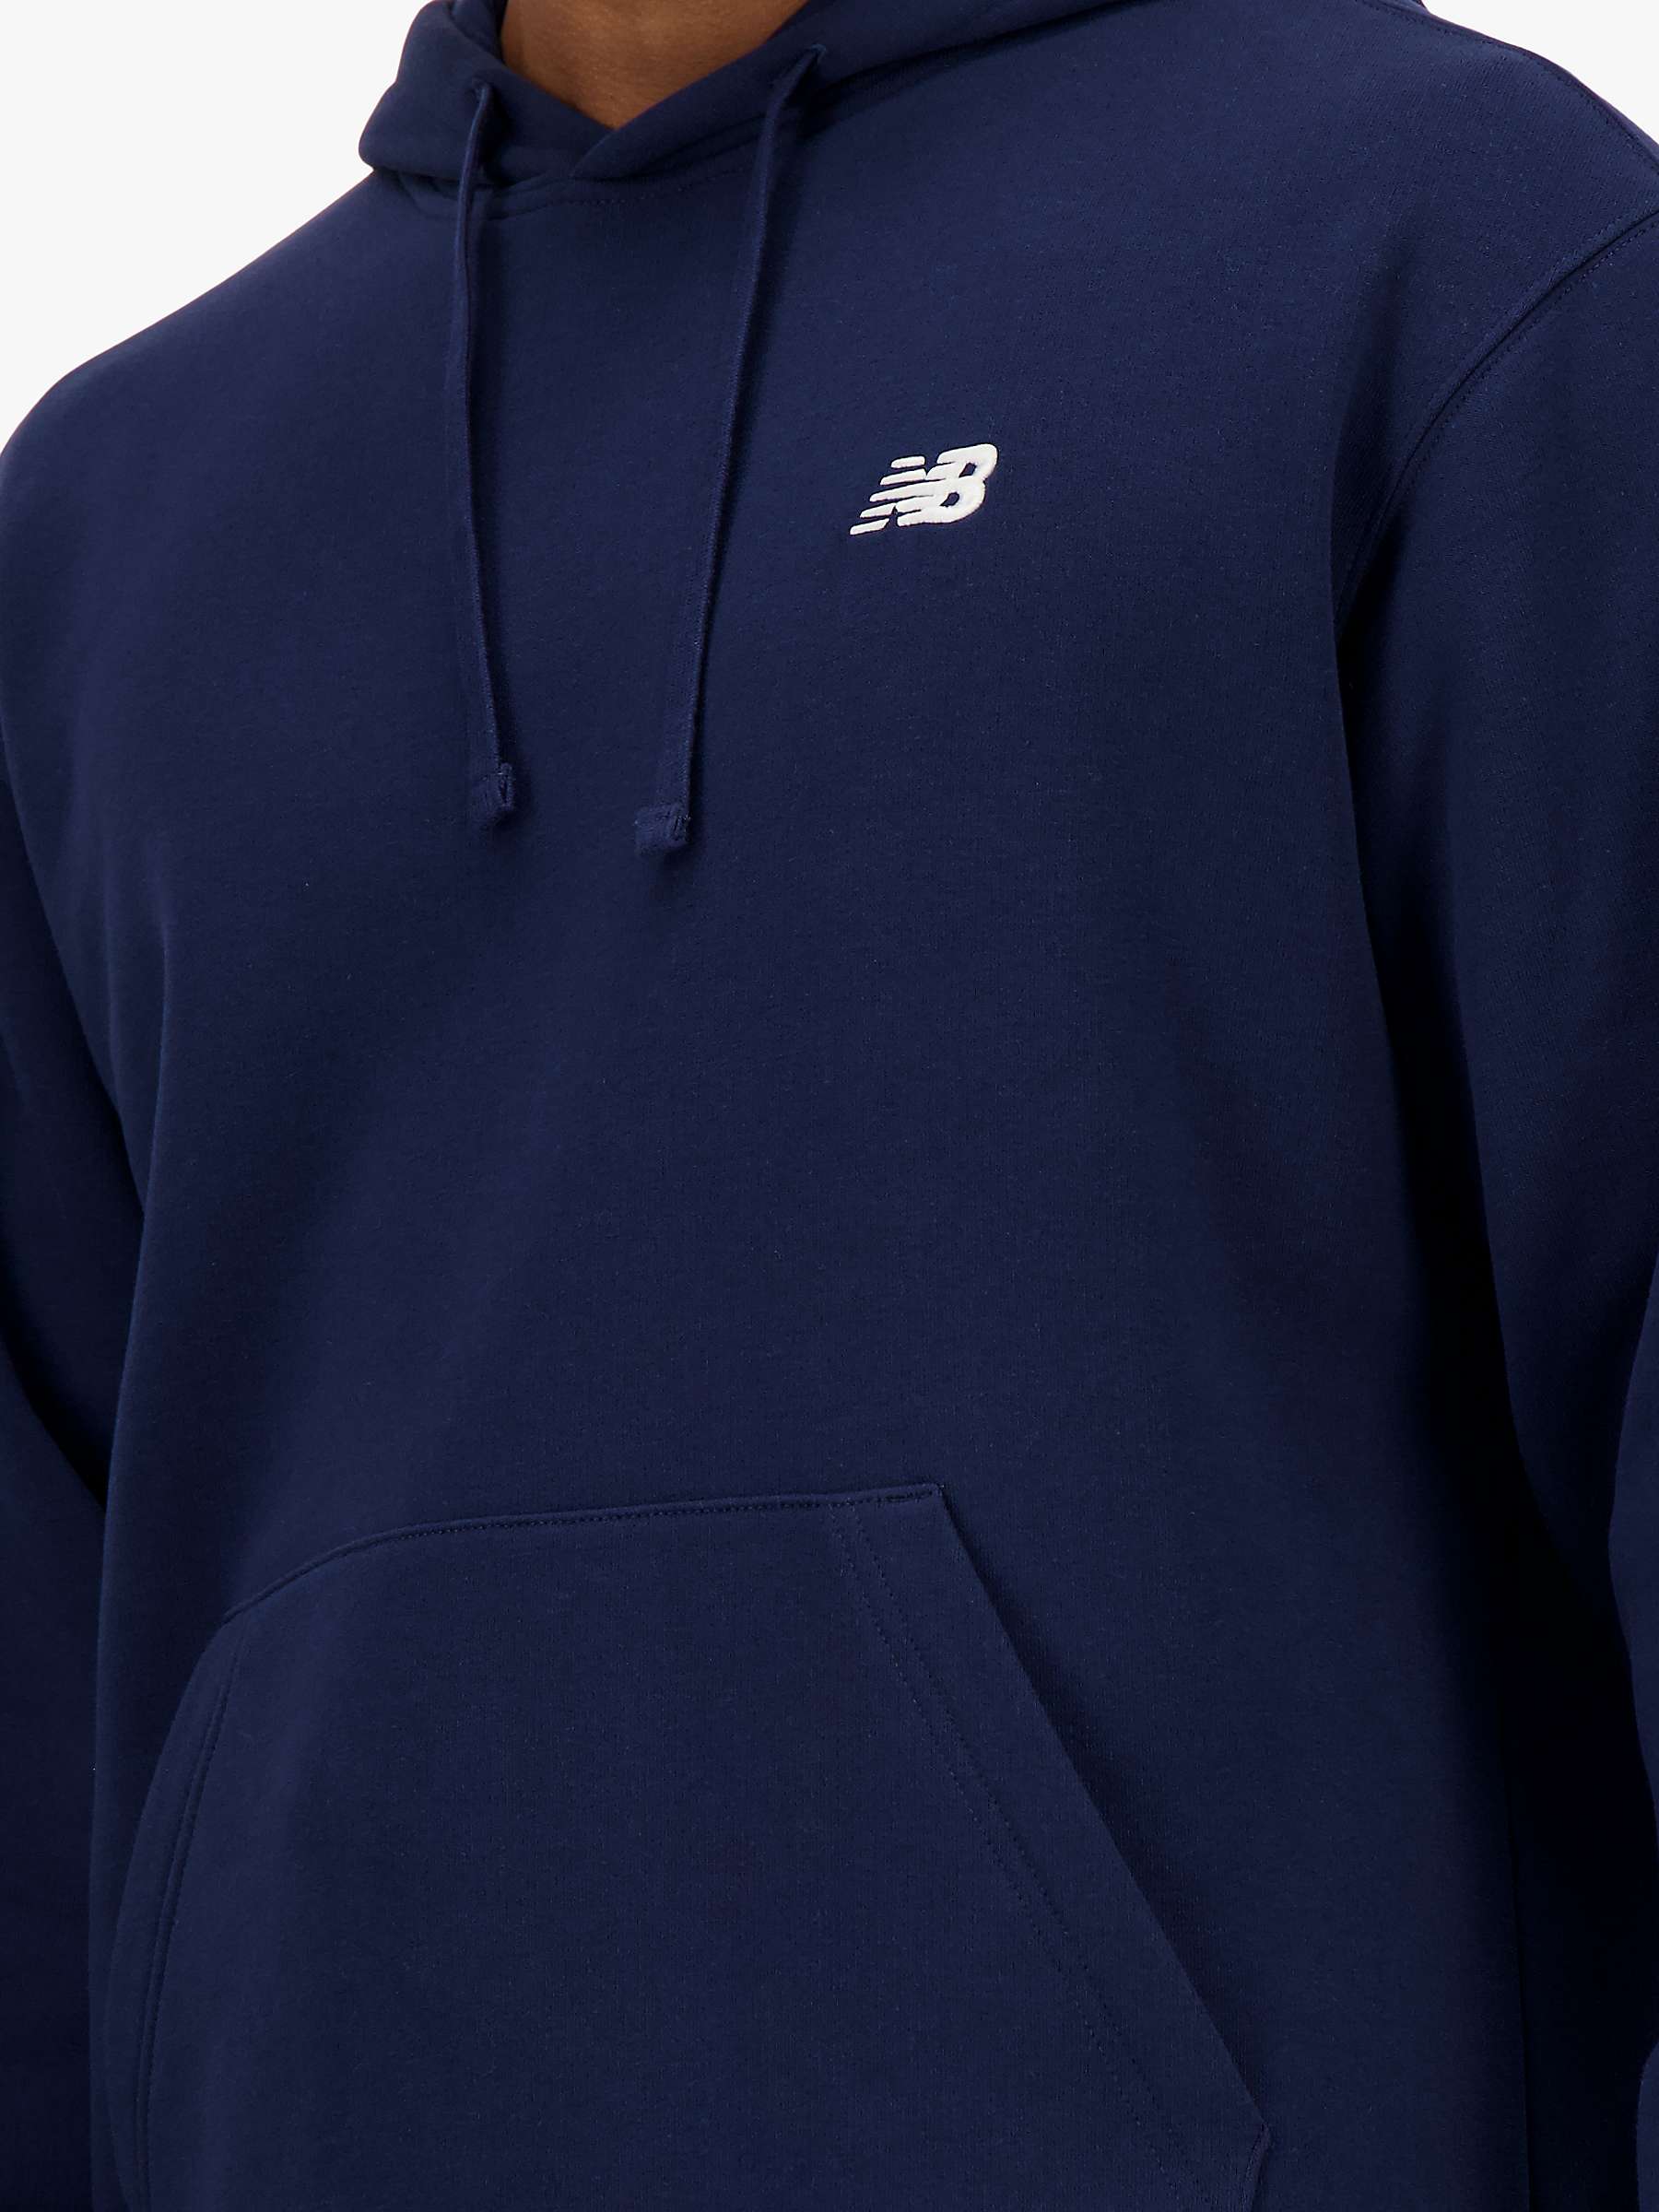 Buy New Balance Small Logo Hoodie, Navy Online at johnlewis.com